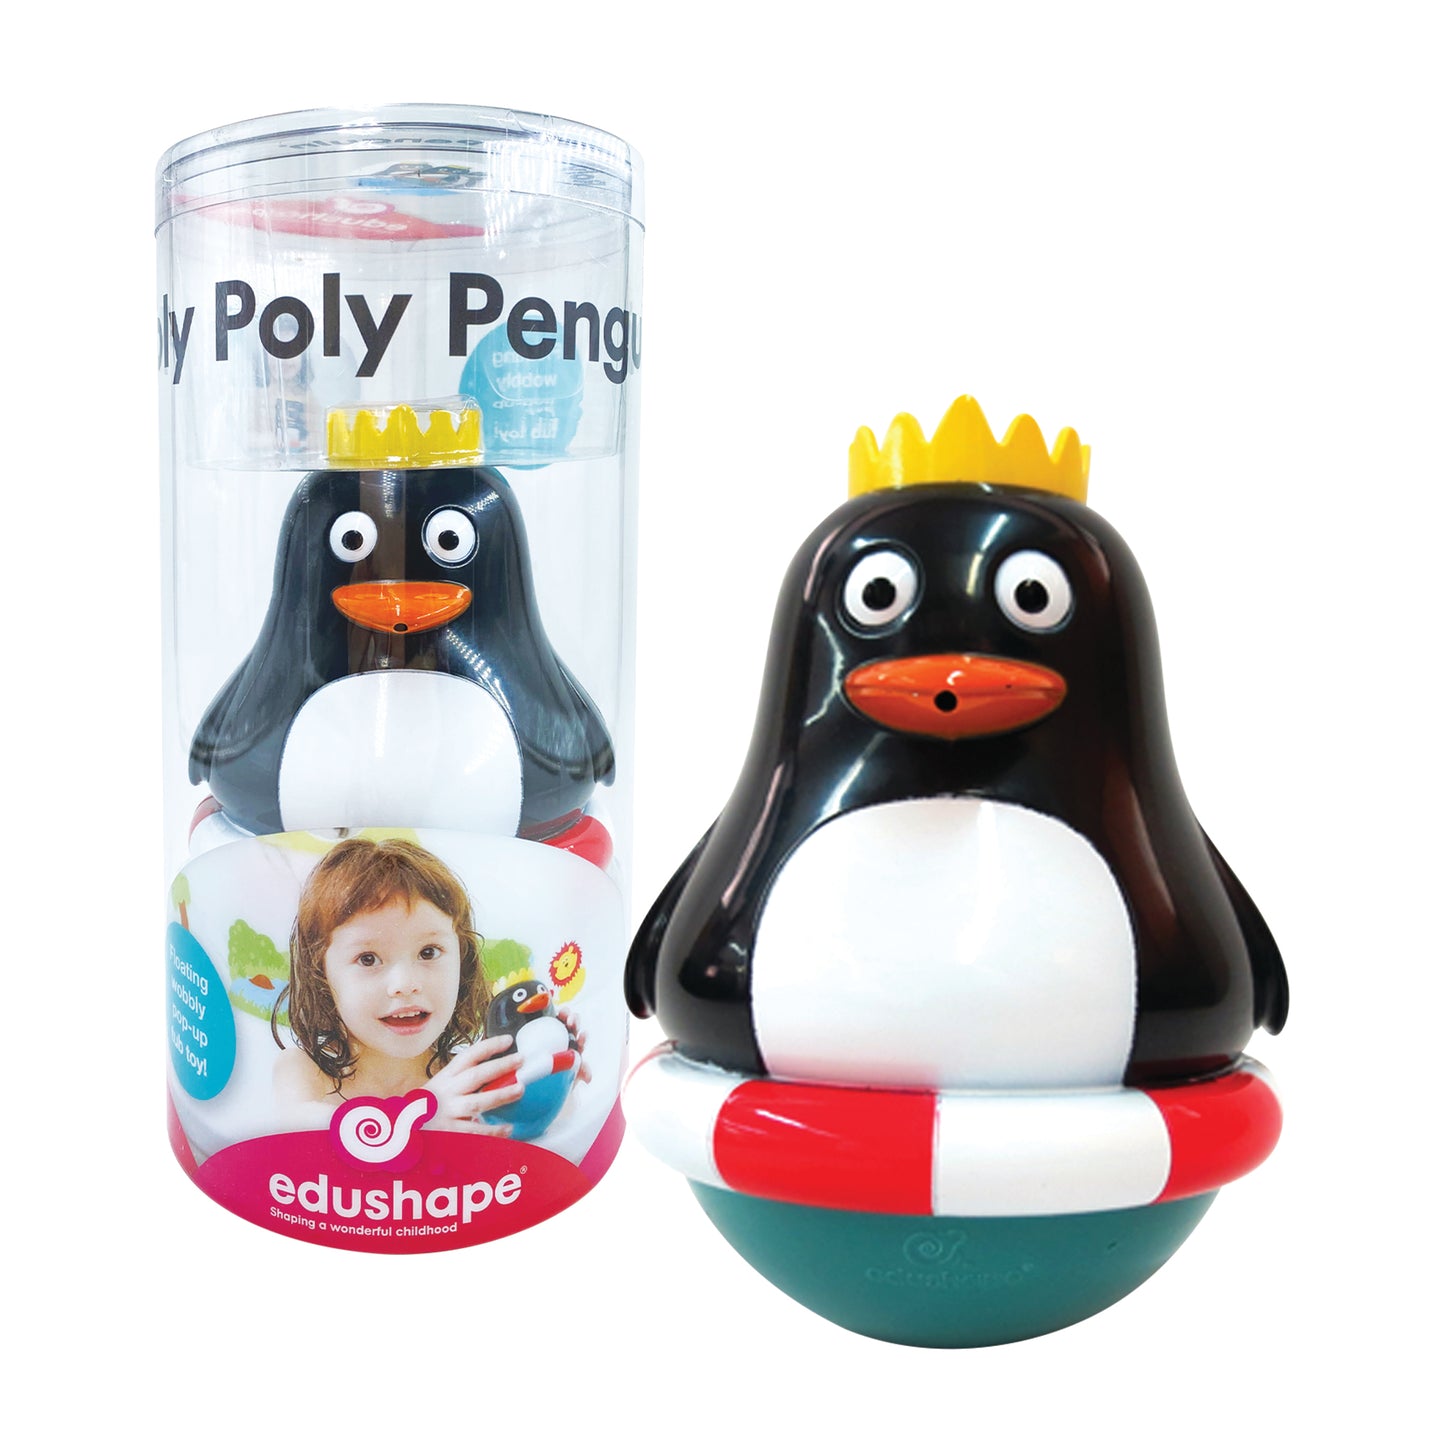 The Roly Poly toys Penguin & Koala are certainly up there in the